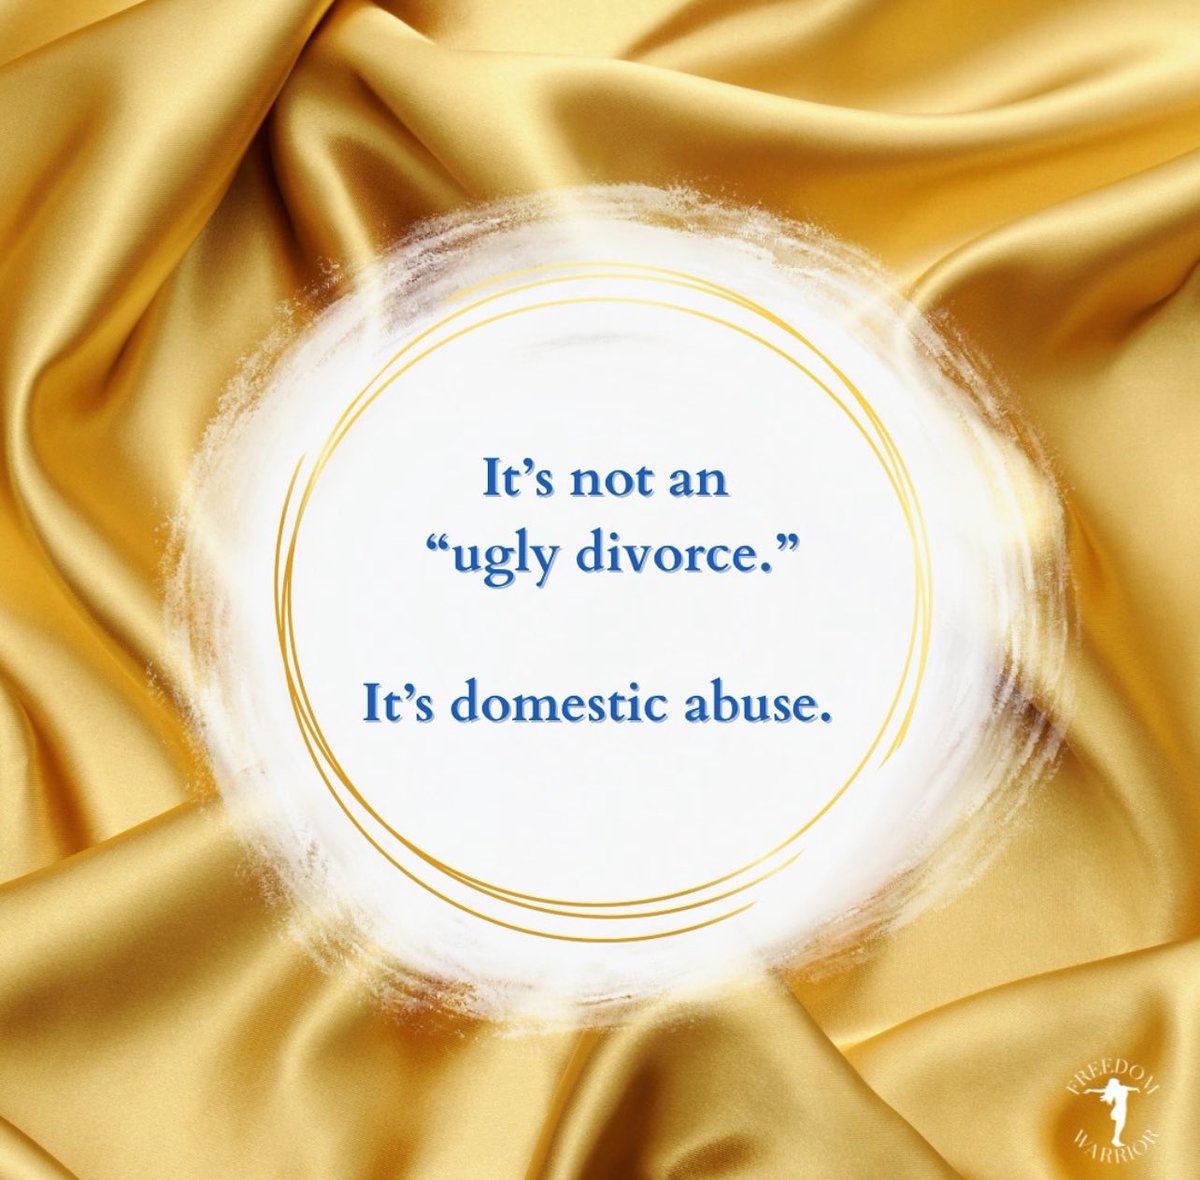 I’m so tired of people dismissing abuse as yet another Jerry Springer divorce. Who does? Family court, some attorneys and some police officers. If you’re an abuse victim, get a team - a coach, attorney, etc. - that believes you. I do. 

#DomesticAbuse #FamilyCourt  #divorce